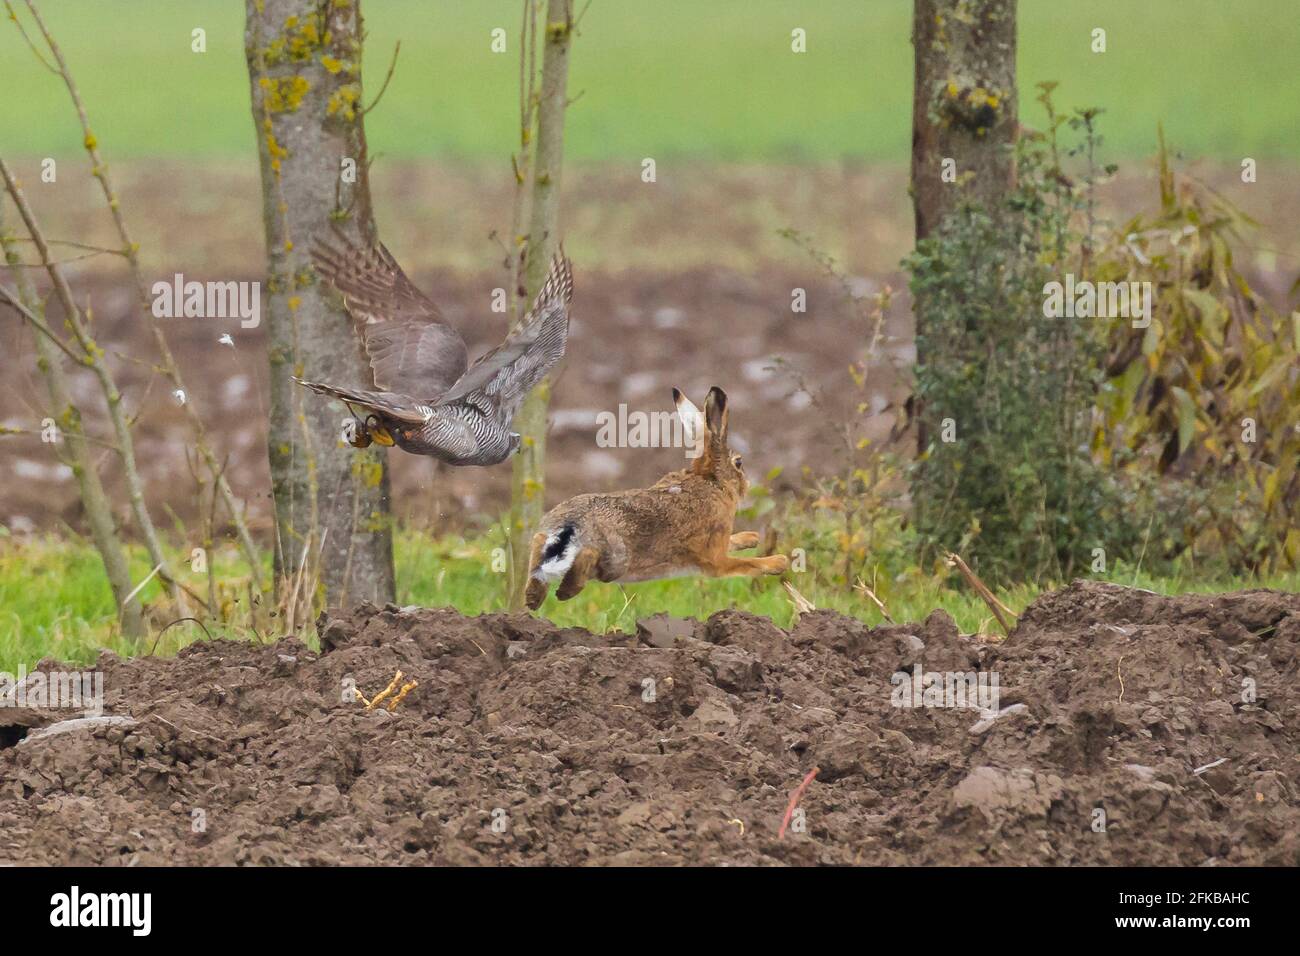 northern goshawk (Accipiter gentilis), chasing a brown hare, brown hare escapes successfully, falconry, Germany, Bavaria, Niederbayern, Lower Bavaria Stock Photo